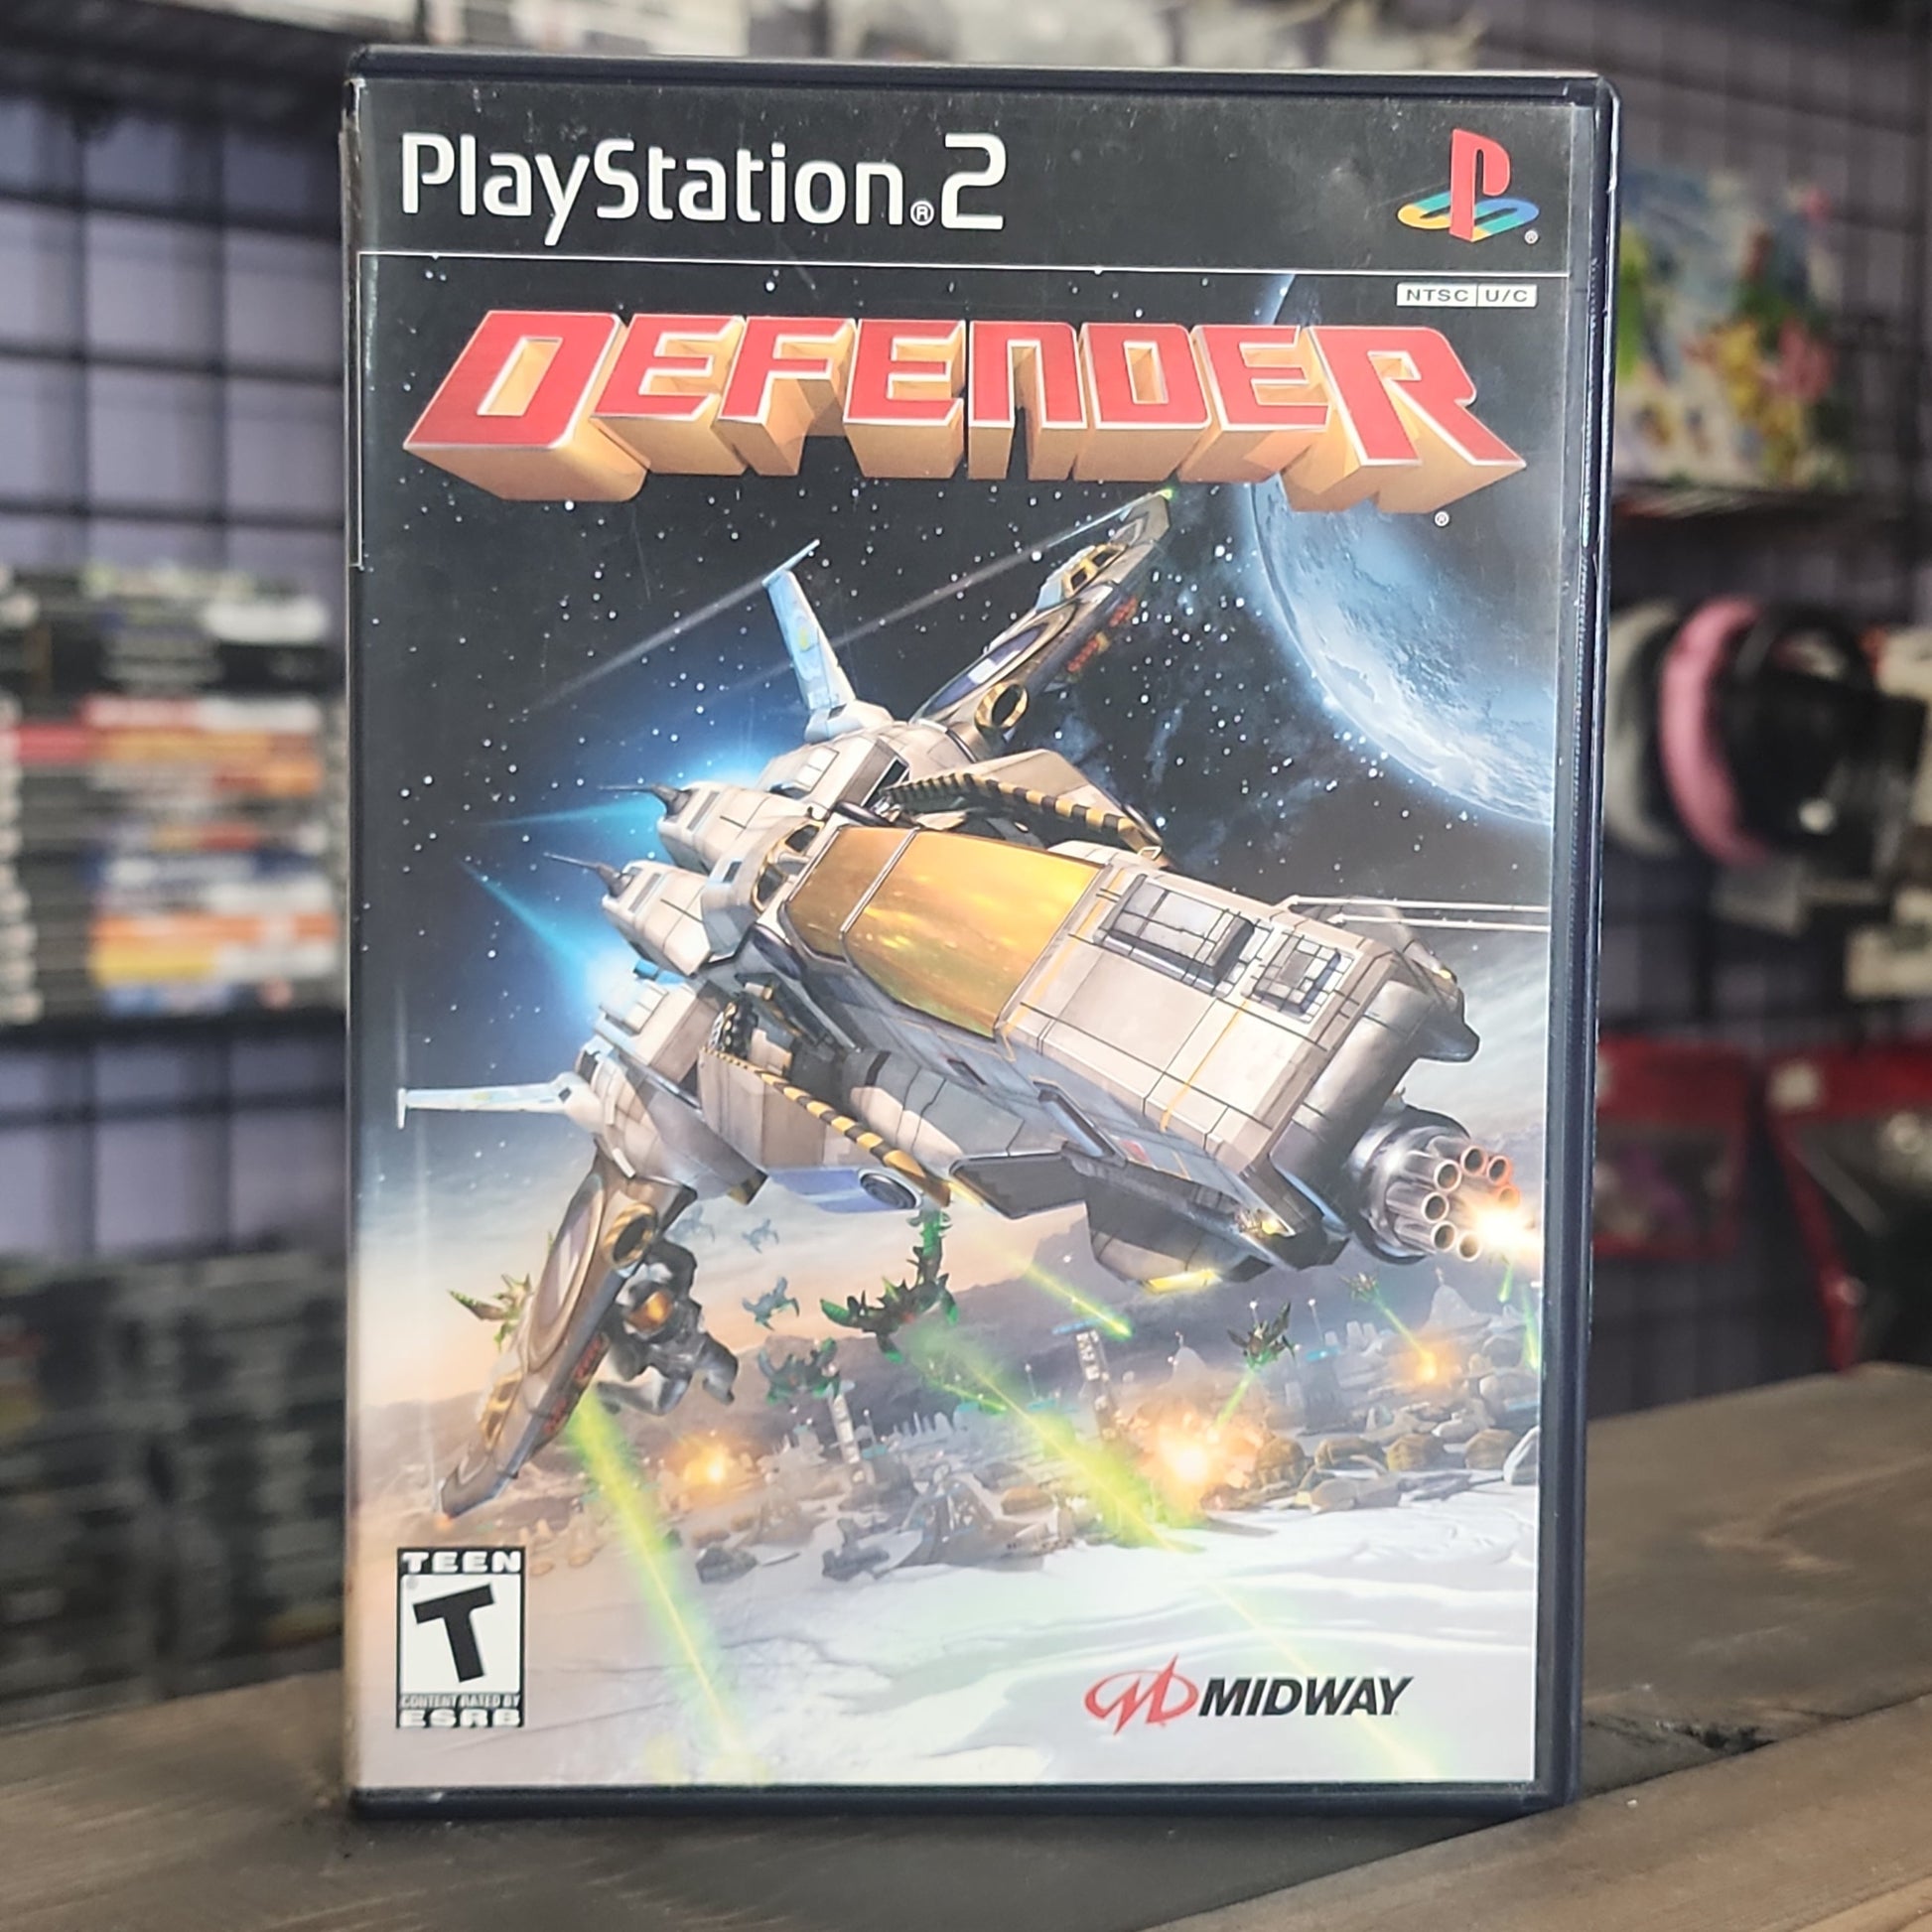 Playstation 2 - Defender Retrograde Collectibles 7 Studios, Arcade, CIB, Defender, Midway, Playstation 2, PS2, Sci-Fi, Science Fiction, Shoot Em Up,  Preowned Video Game 